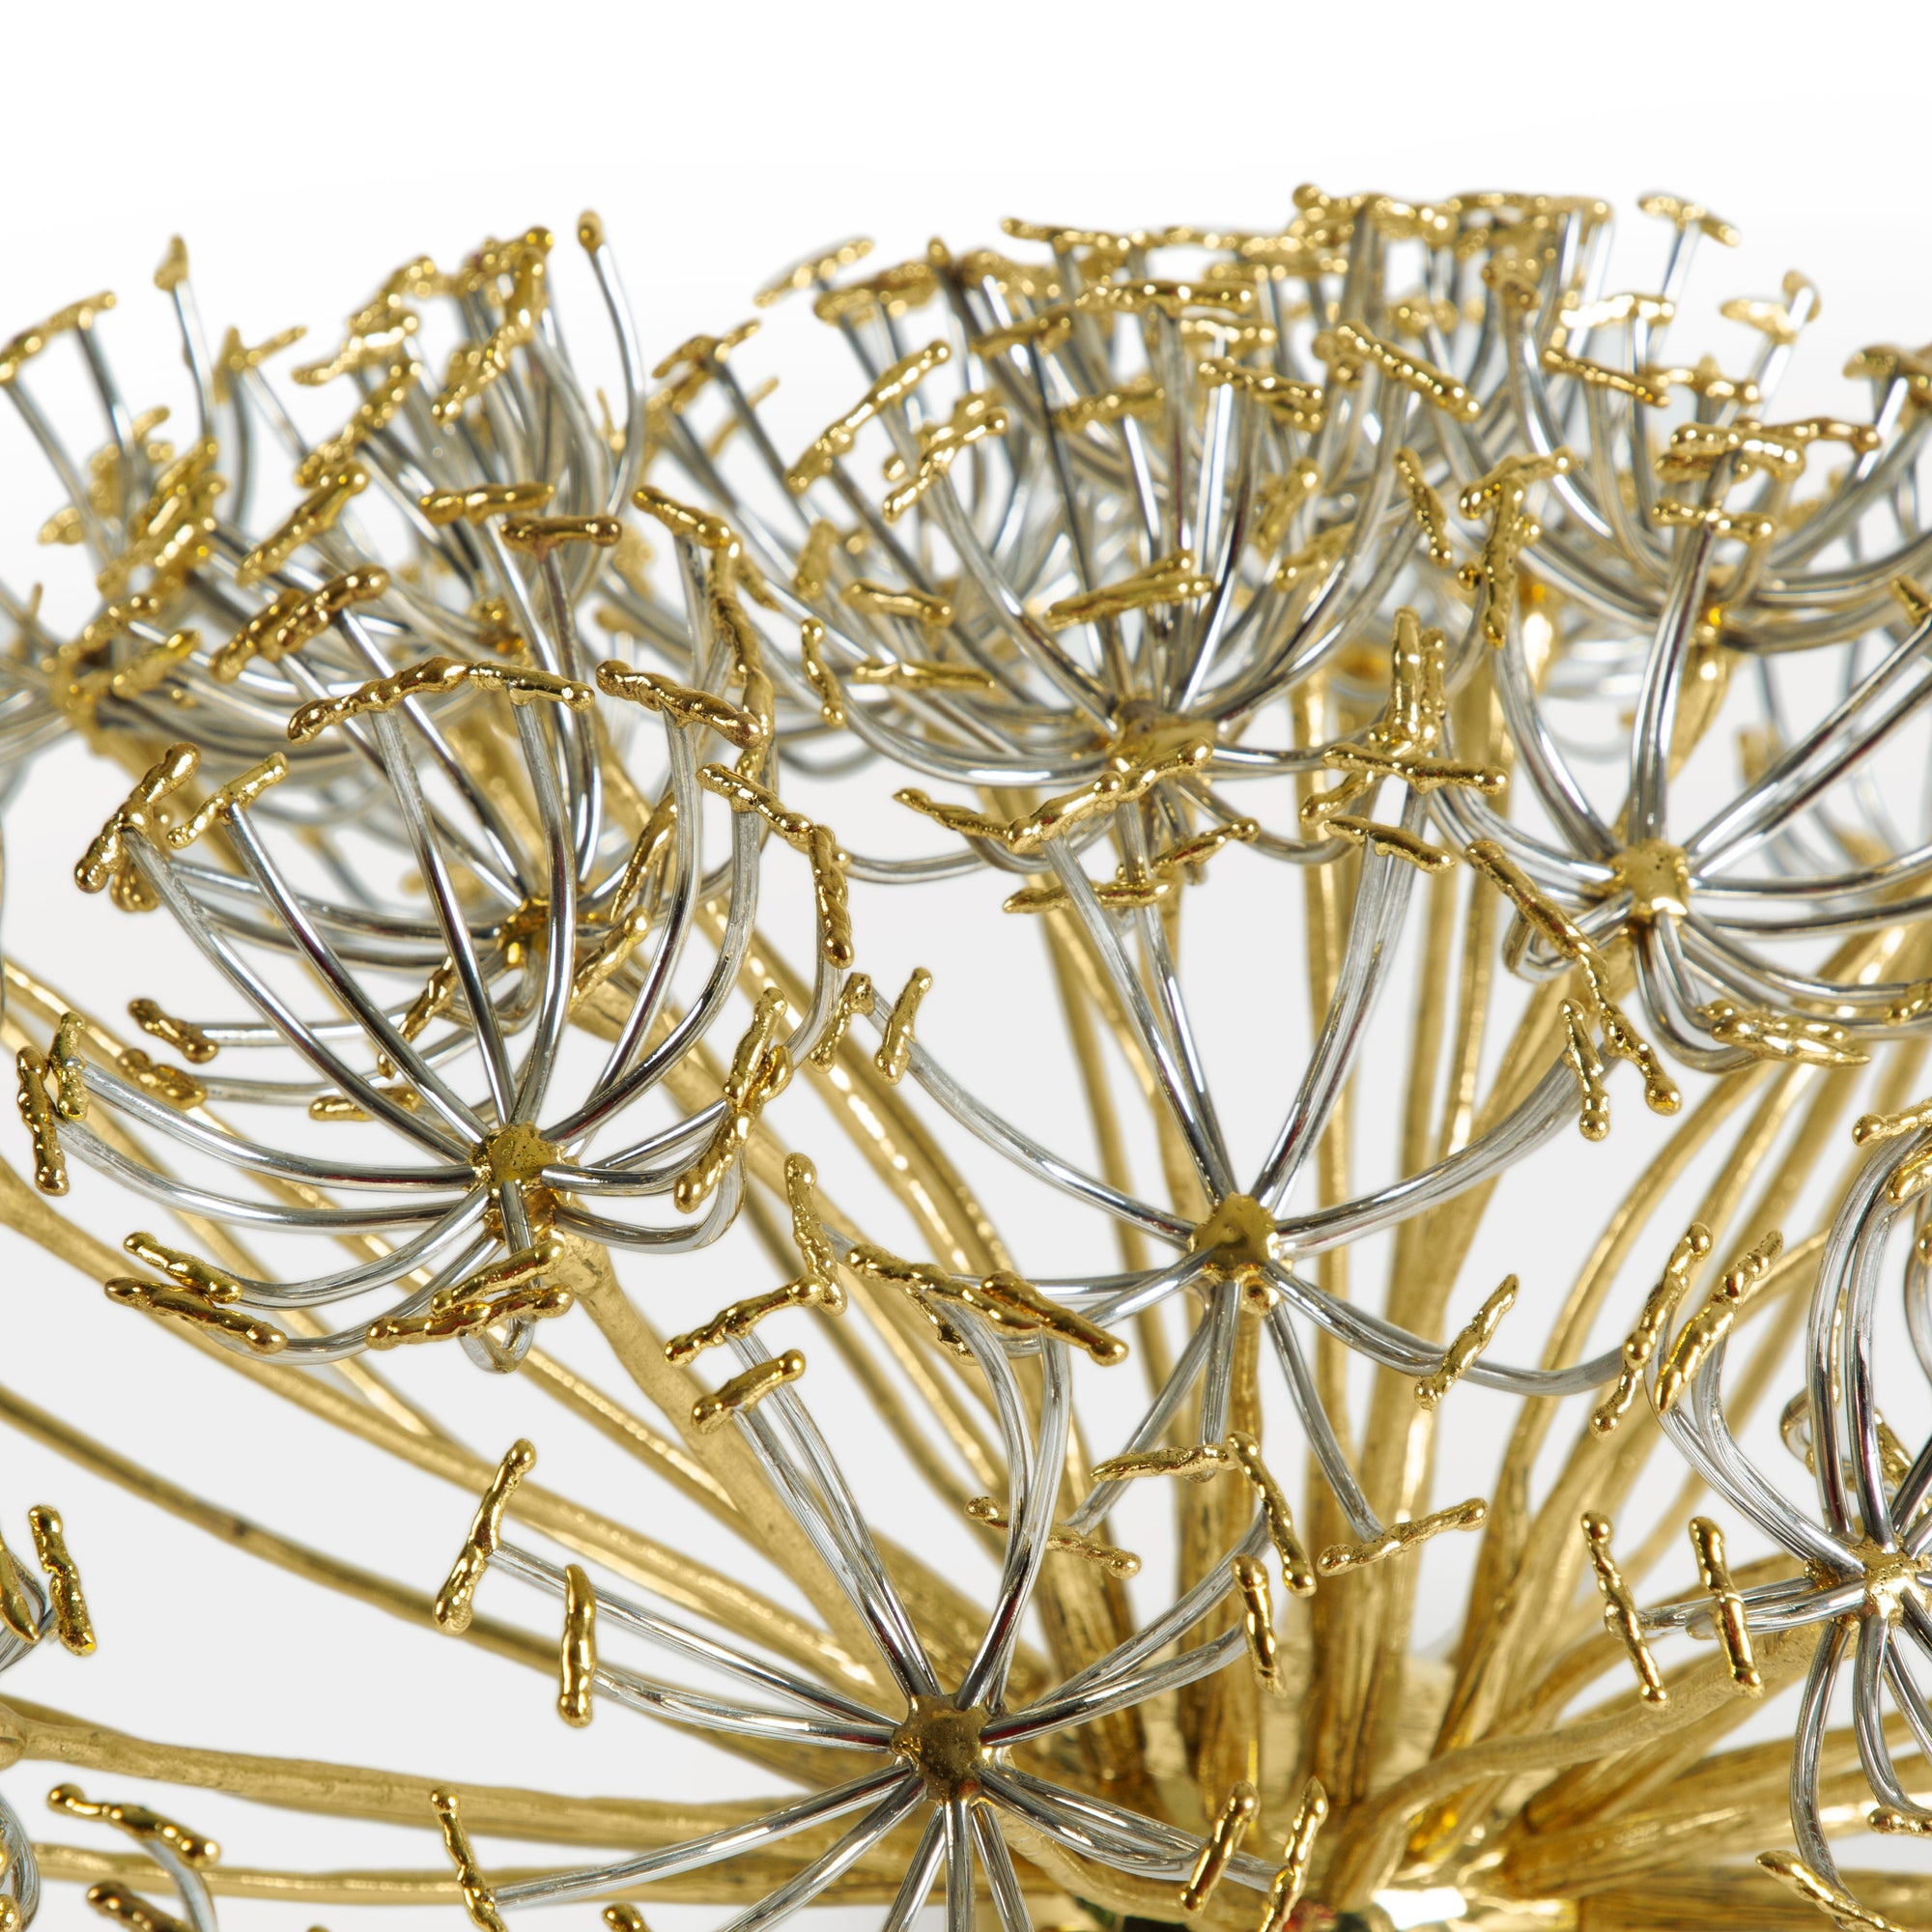 Michael Aram Queen Annes Lace Sculpture (Limited Edition of 250)